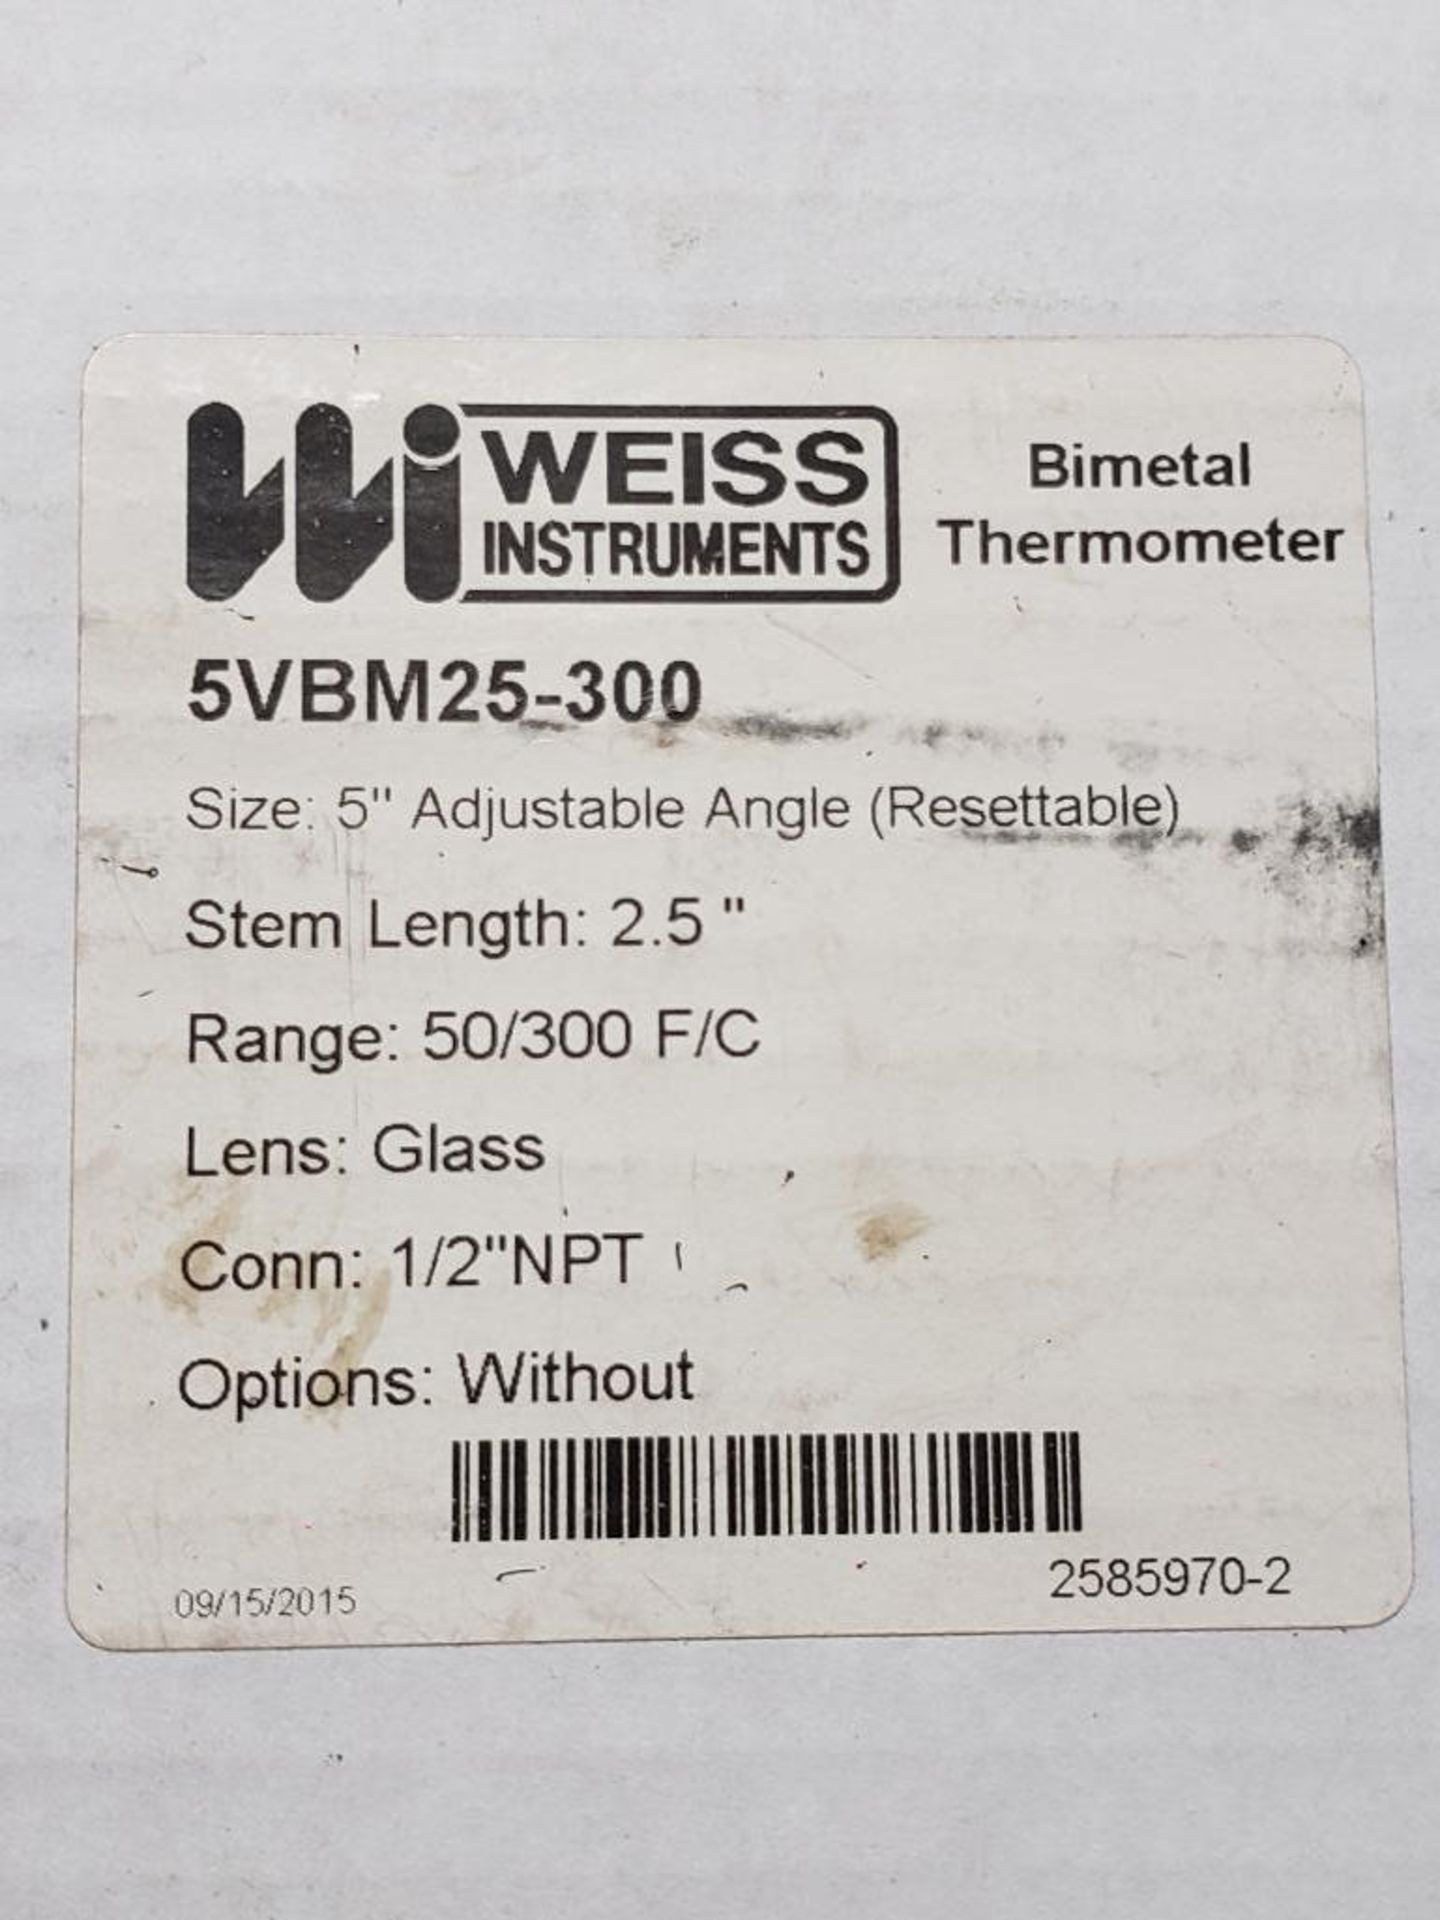 Qty 2 - Weiss Instruments 5VBM25-300 5" Adjustable Angle bimetal thermometer. - Image 4 of 4